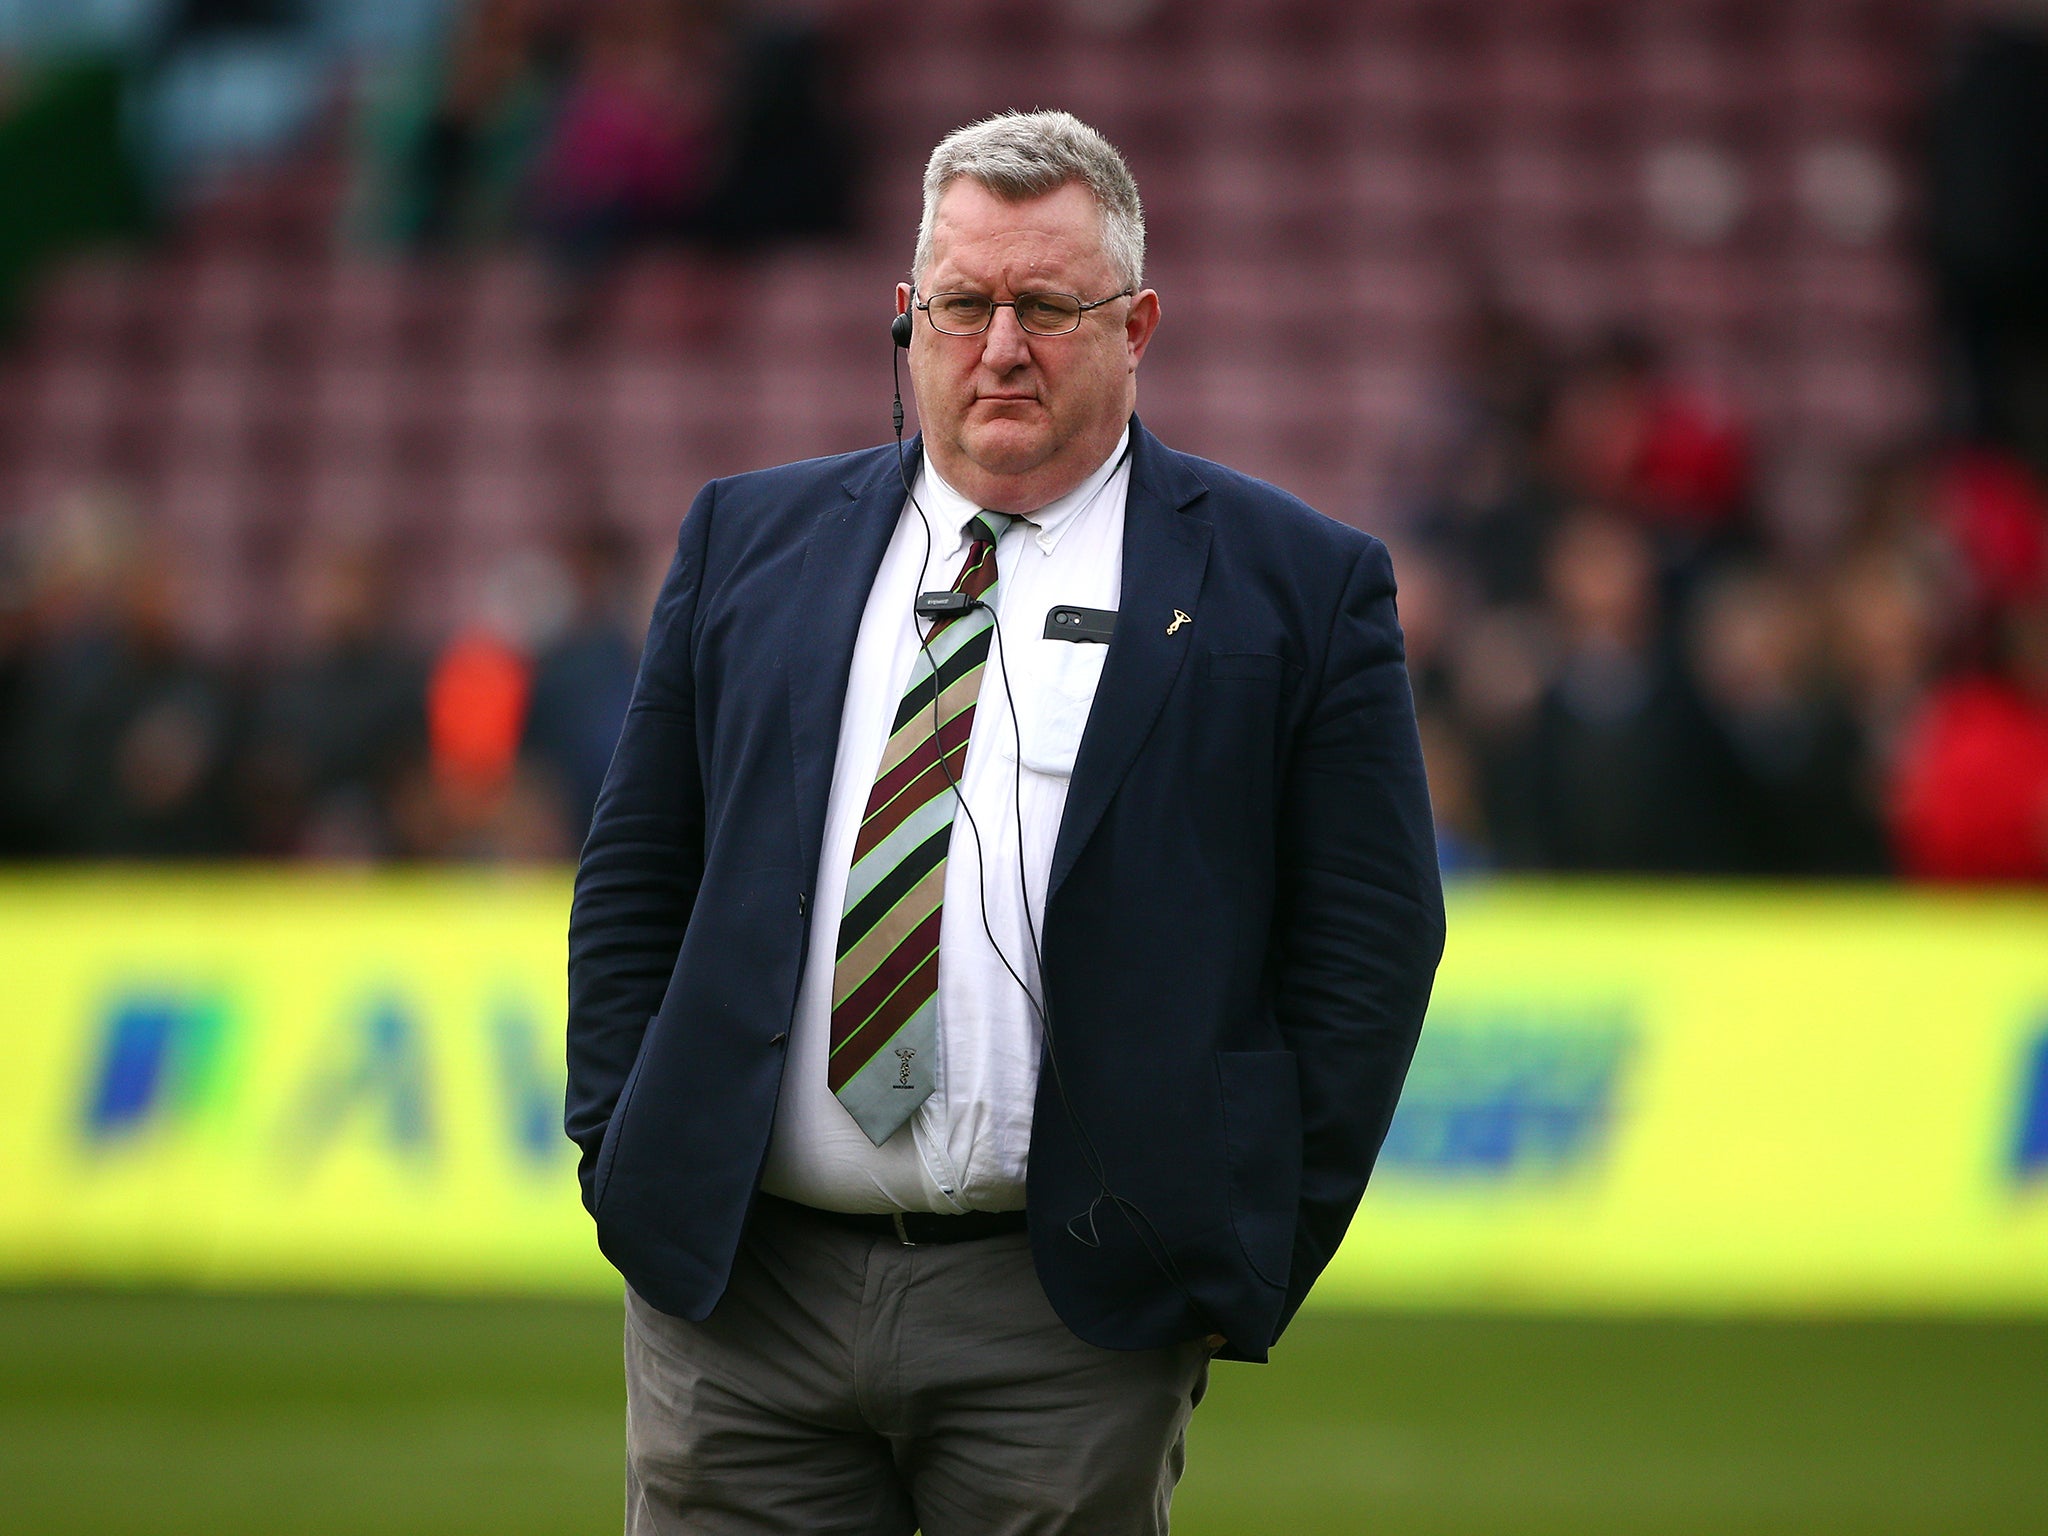 John Kingston will leave Harlequins at the end of the season after a disappointing season